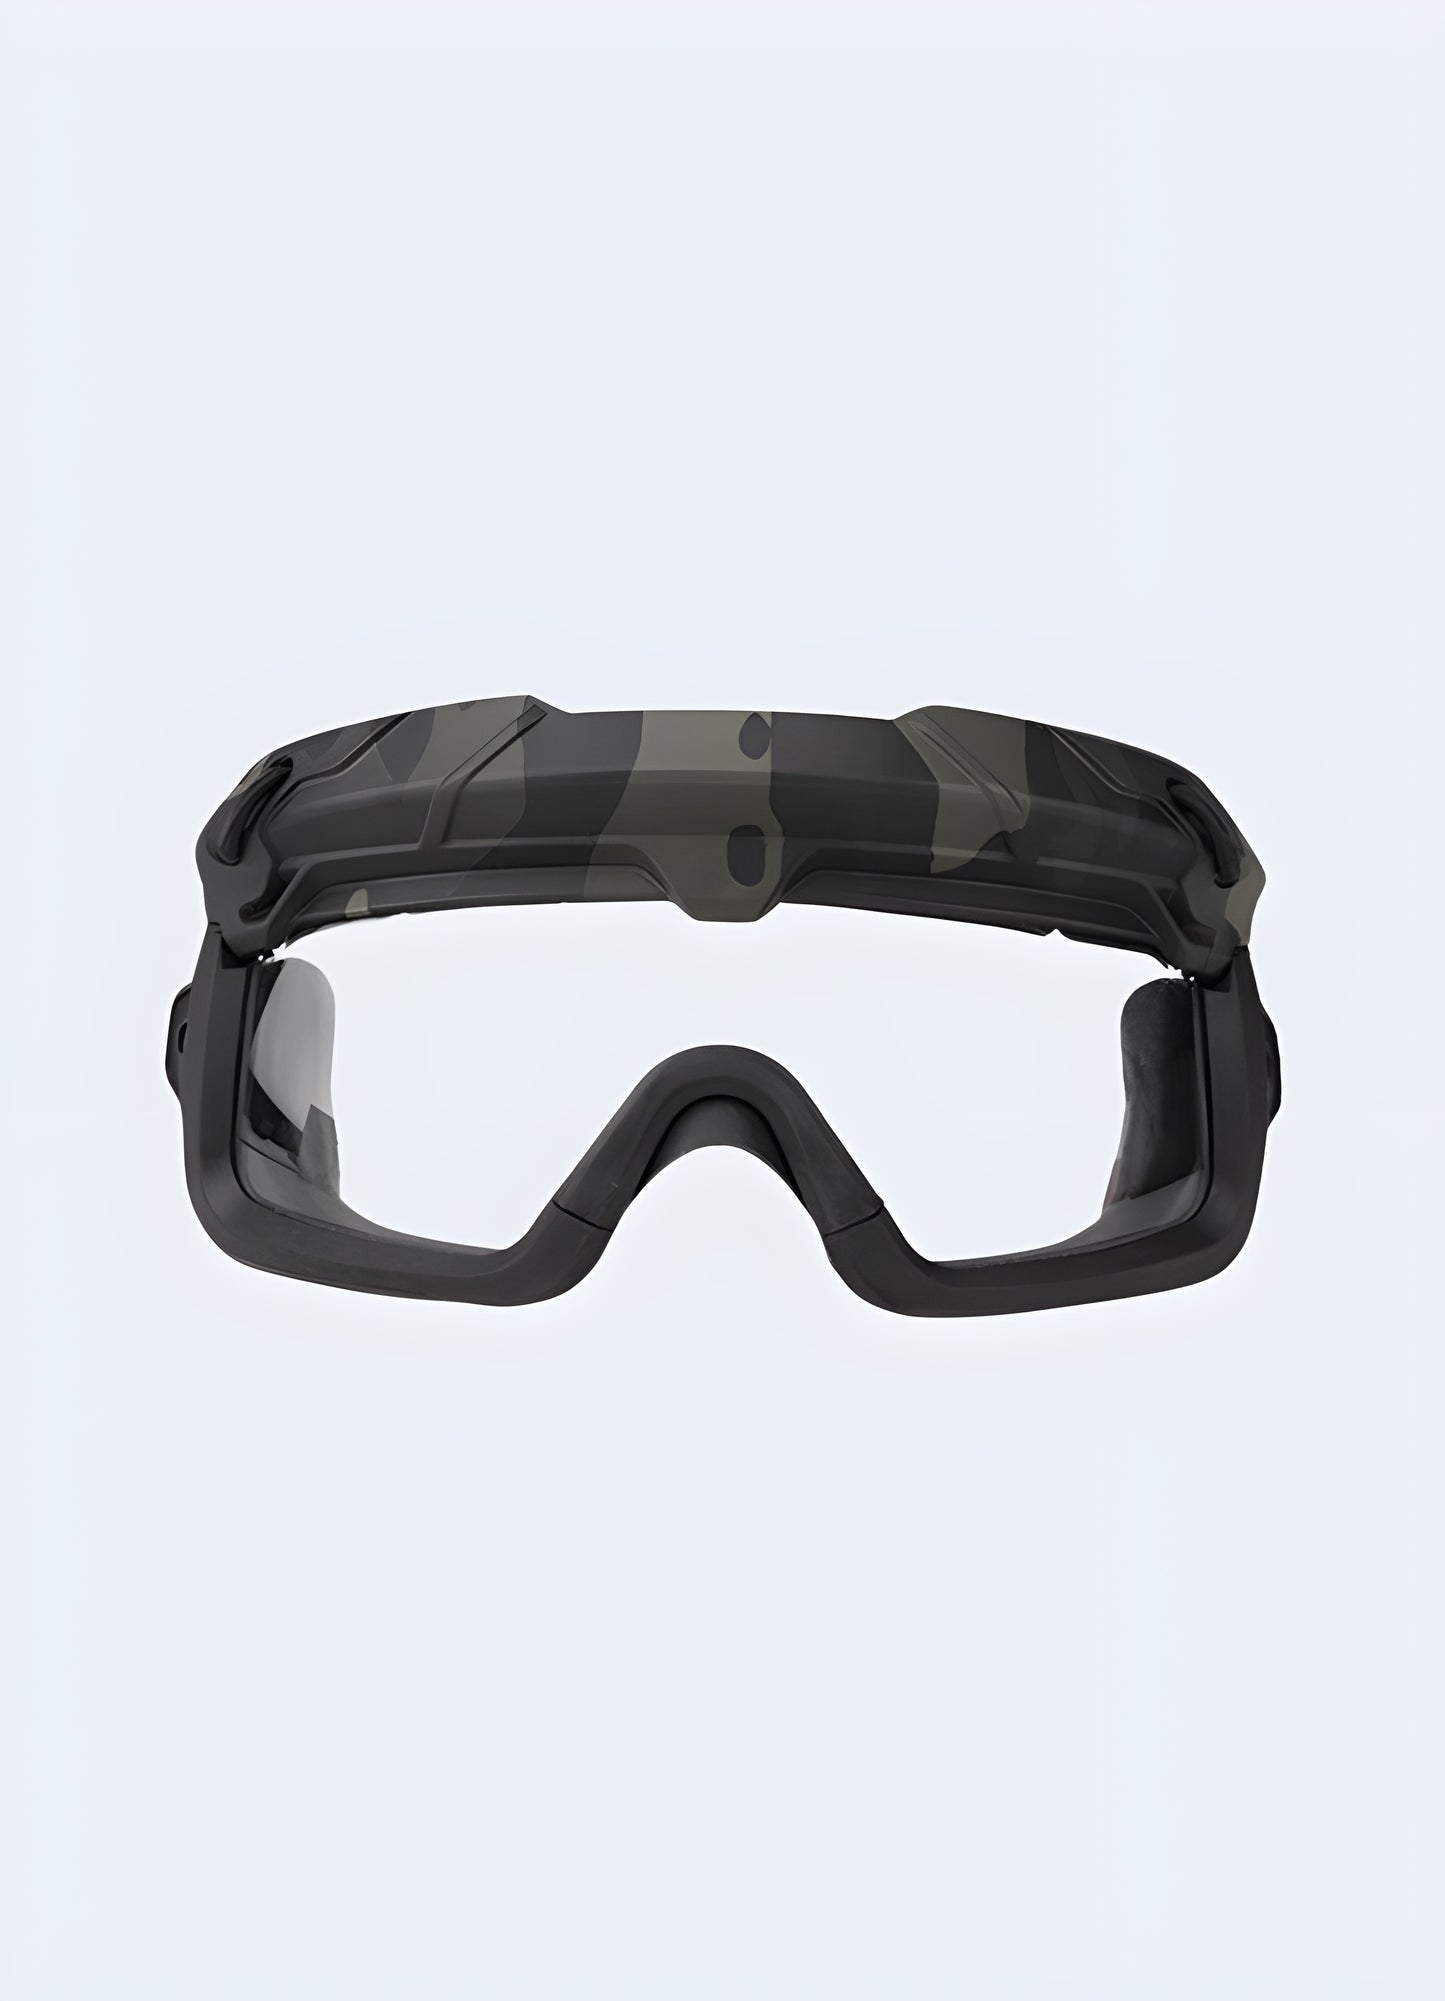 Conquer any terrain with warcore glasses.